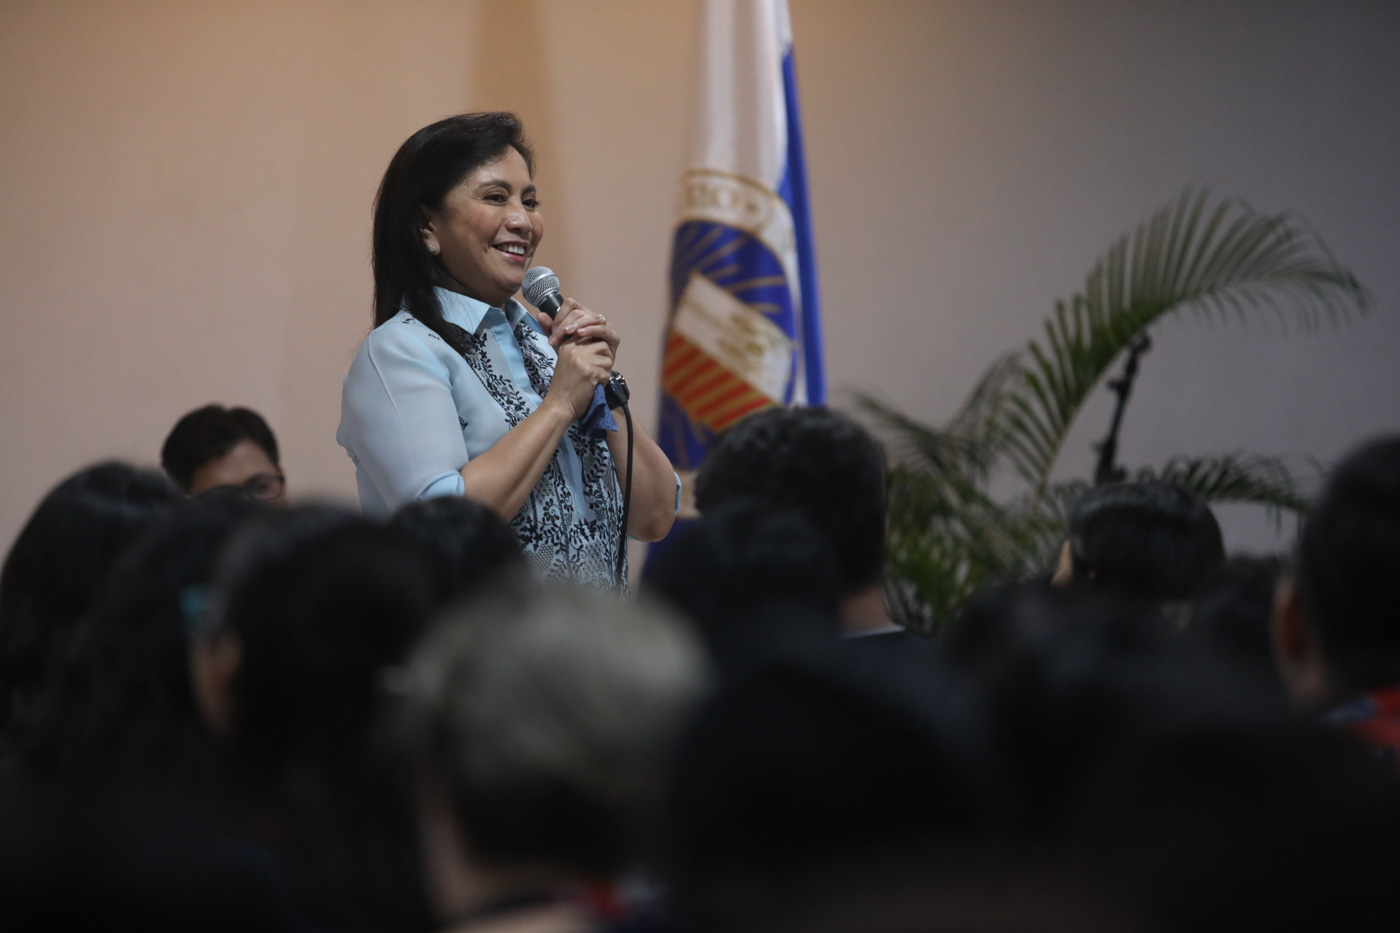 PET RULING. The Presidential Electoral Tribunal is expected to soon rule on the initial recount of 3 pilot provinces in the electoral protest filed against Vice President Leni Robredo. File photo by Chari Villegas/OVP 